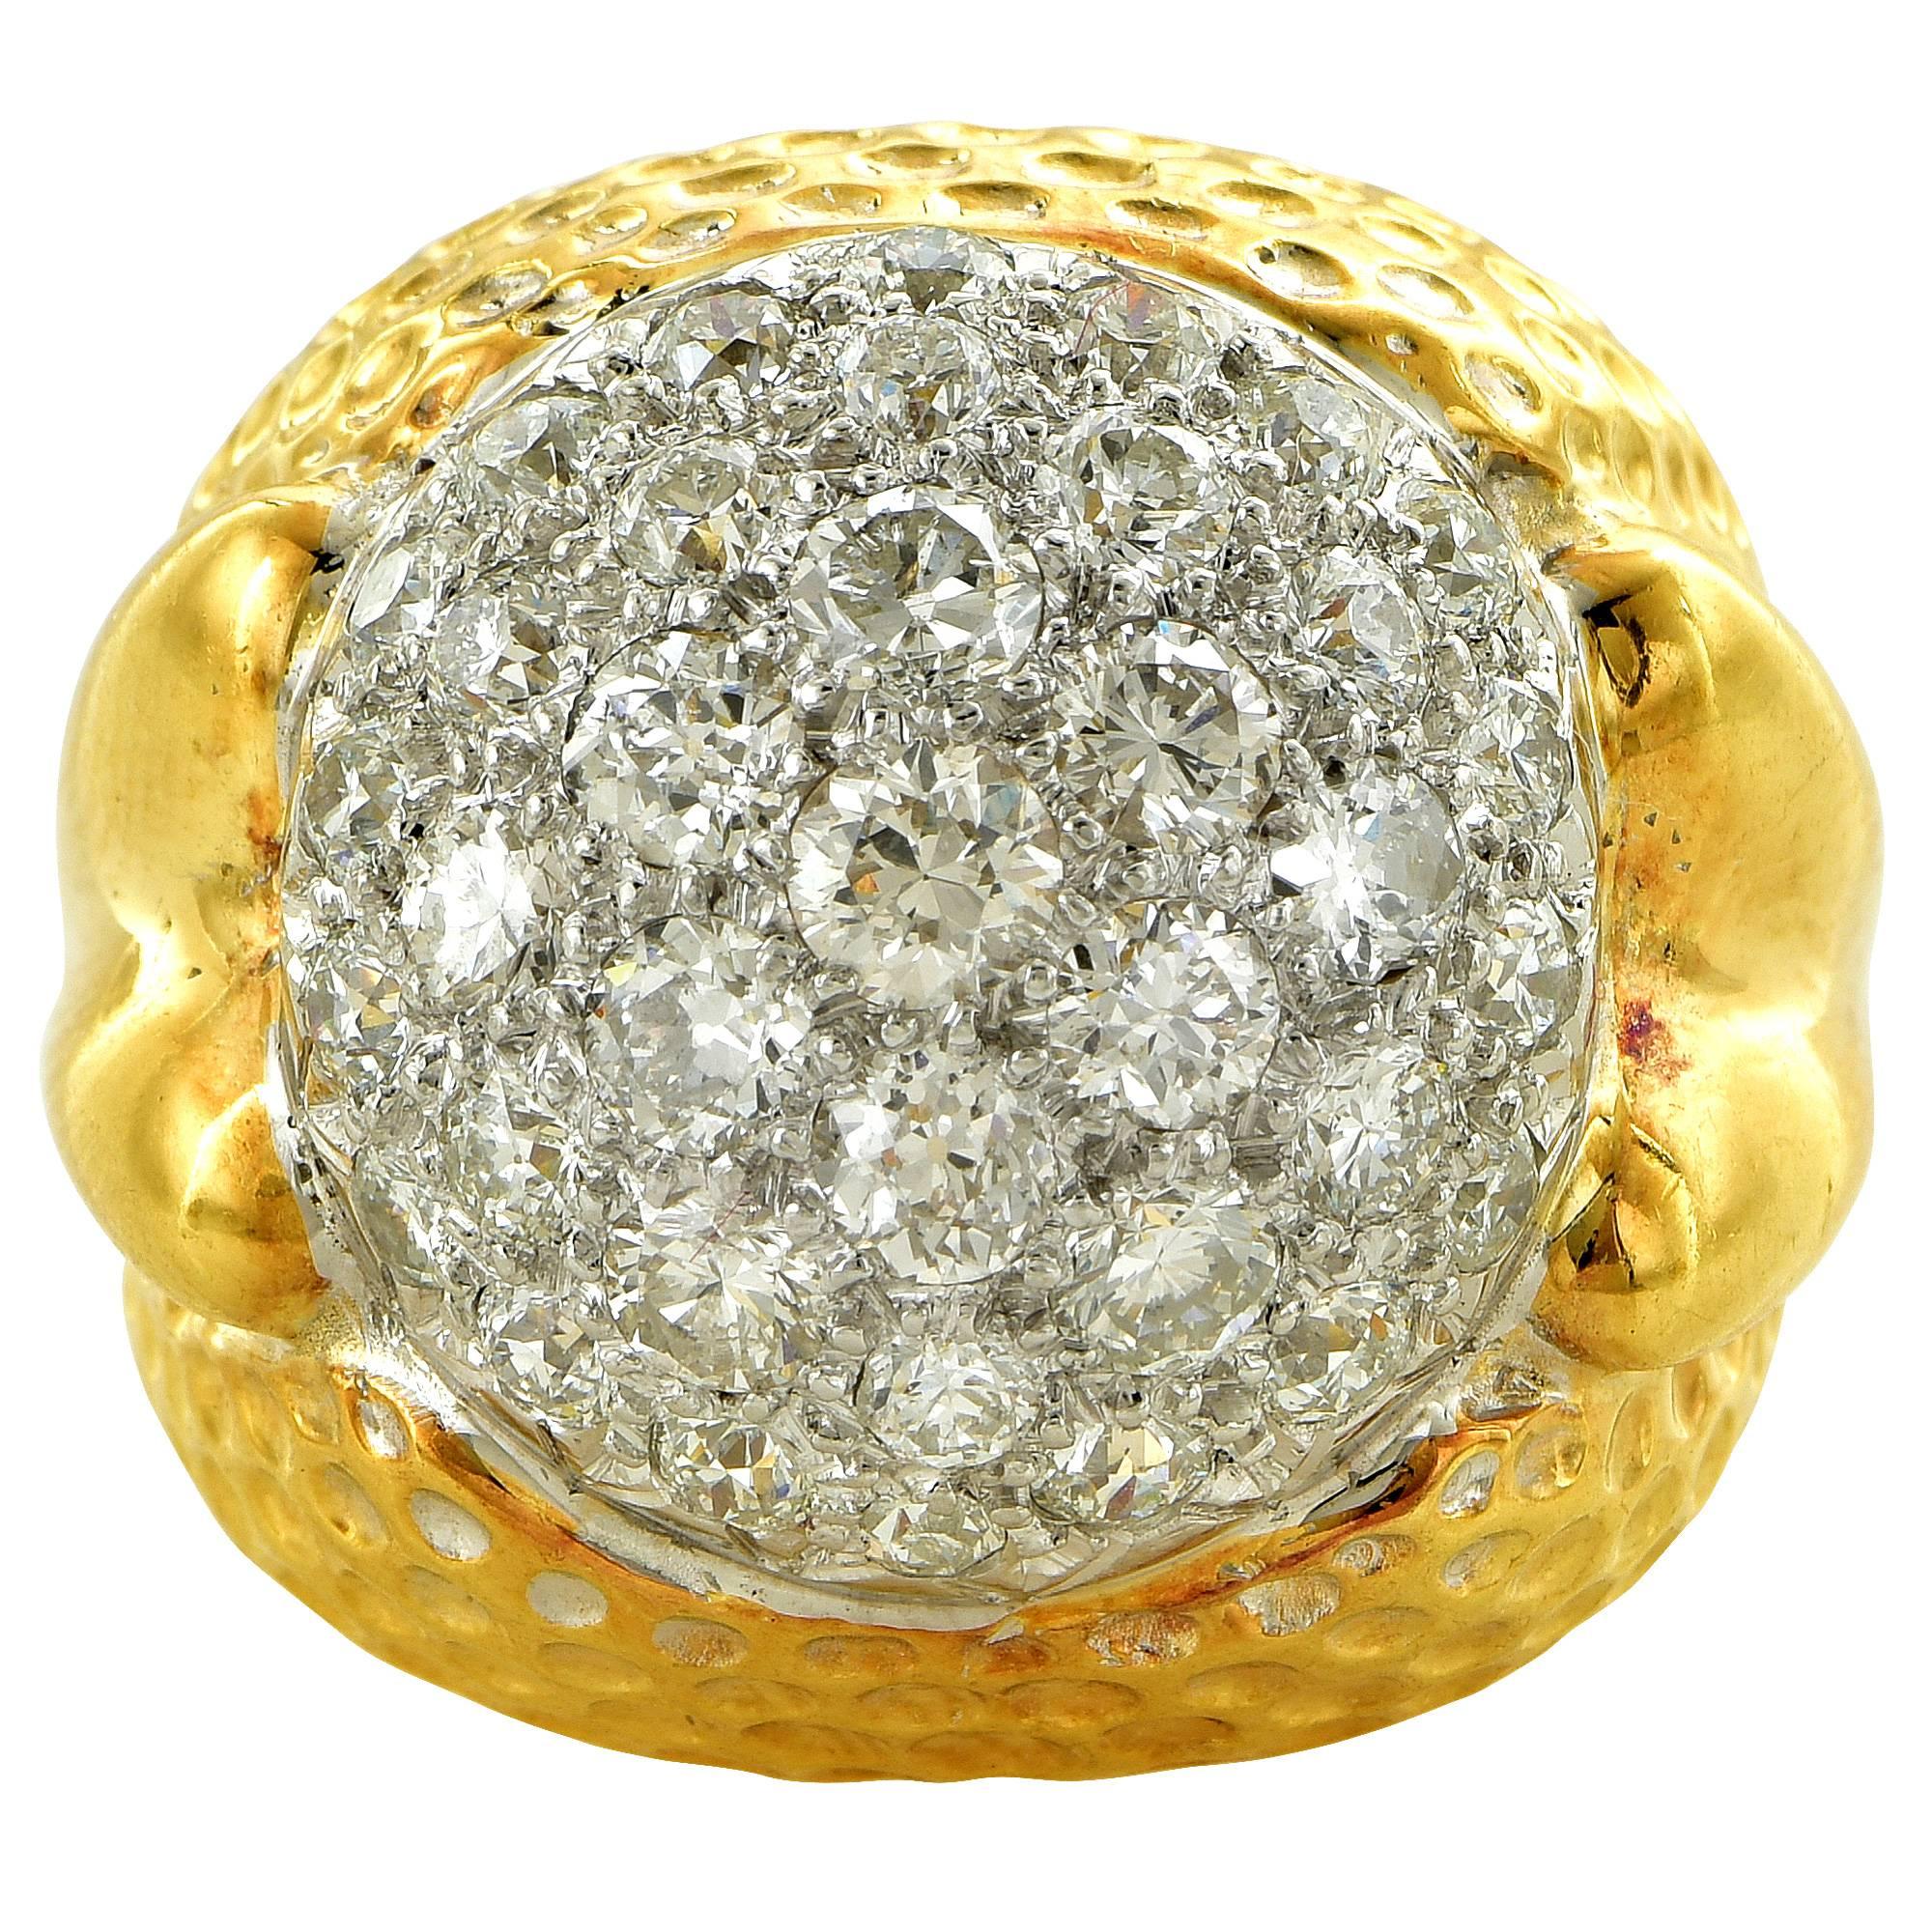 18k white and yellow gold domed ring featuring 38 Round brilliant cut diamonds weighing approximately 3.50cts F-G color and VS-SI clarity.

This beautiful ring is a size 6.5 and can be sized up or down.
It is stamped and/or tested as 18k gold.
The